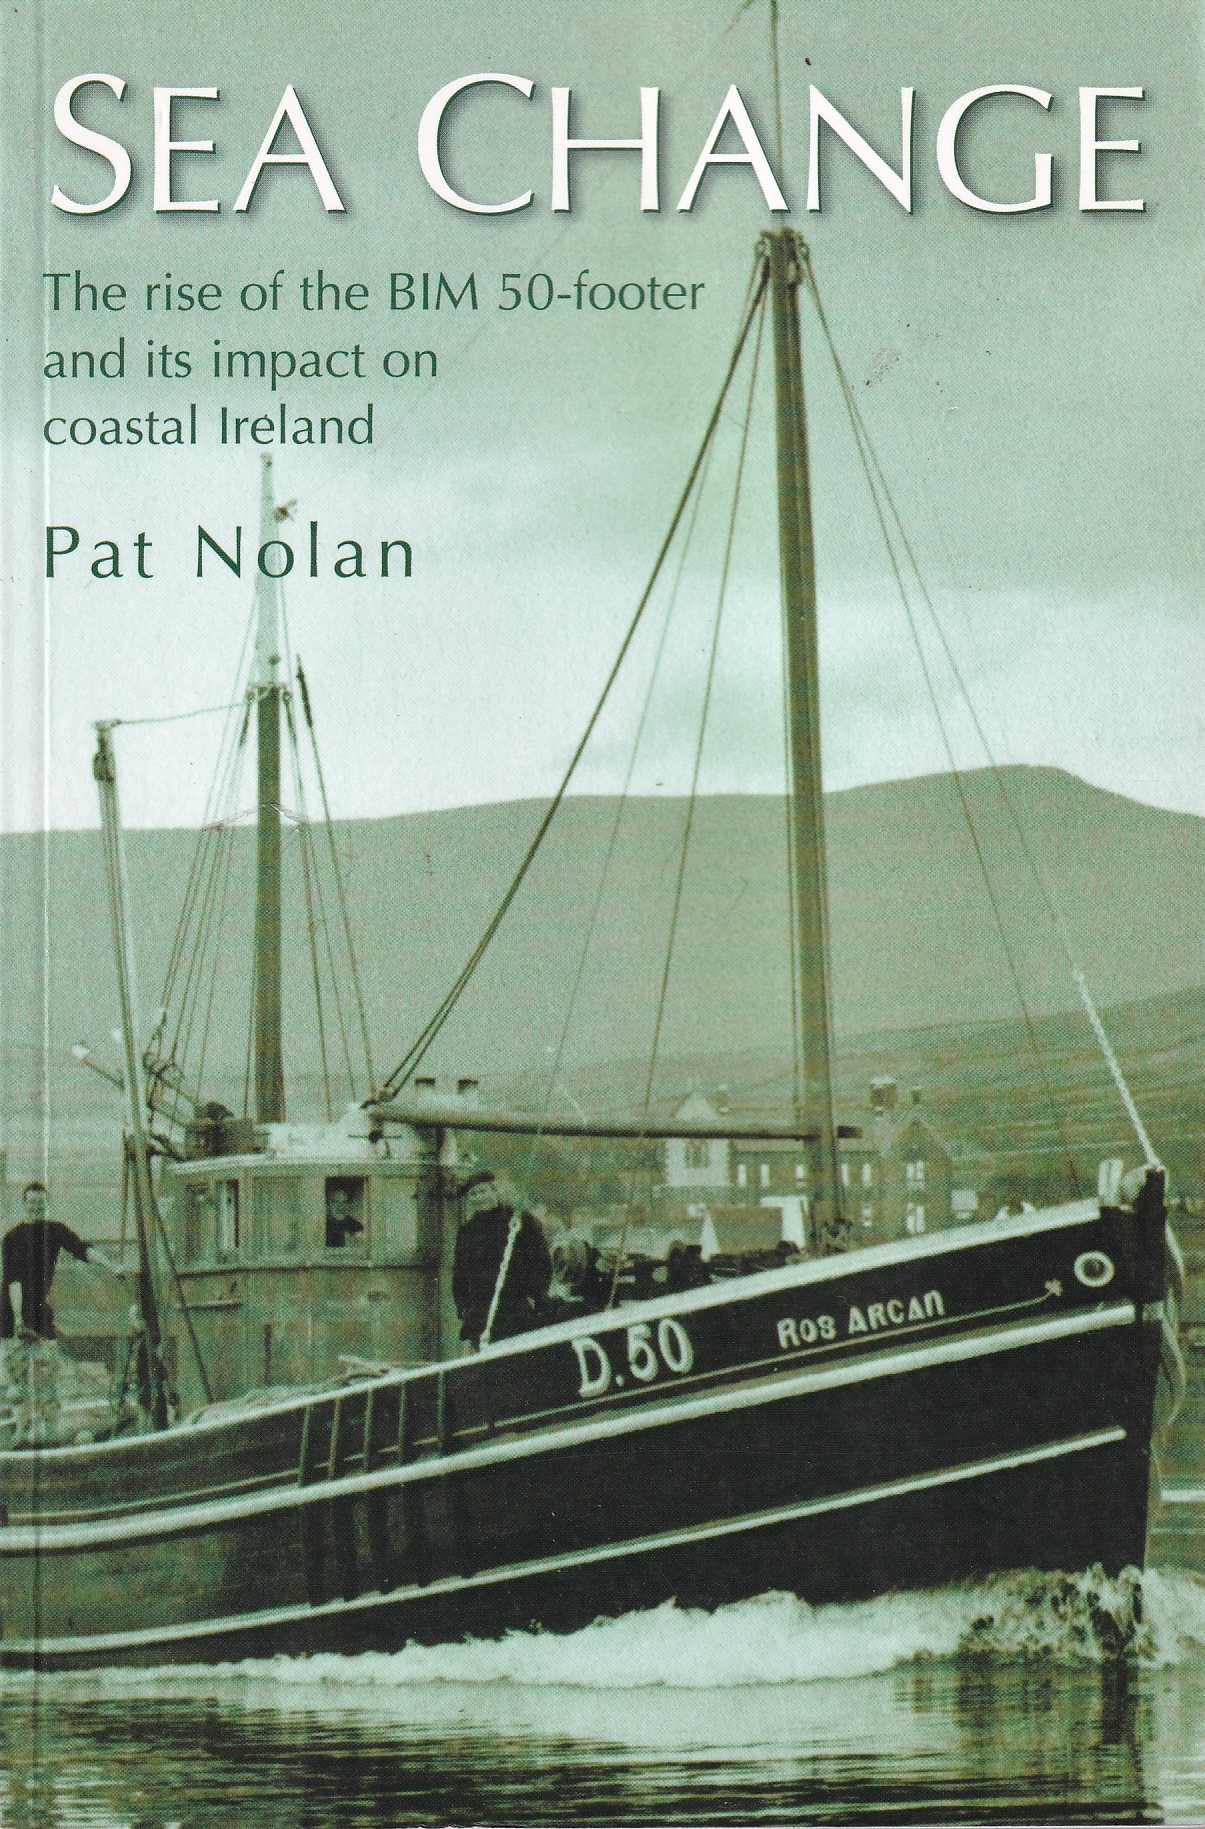 Sea Change: The Rise of the BIM 50-footer and Its Impact on Coastal Ireland by Pat Nolan